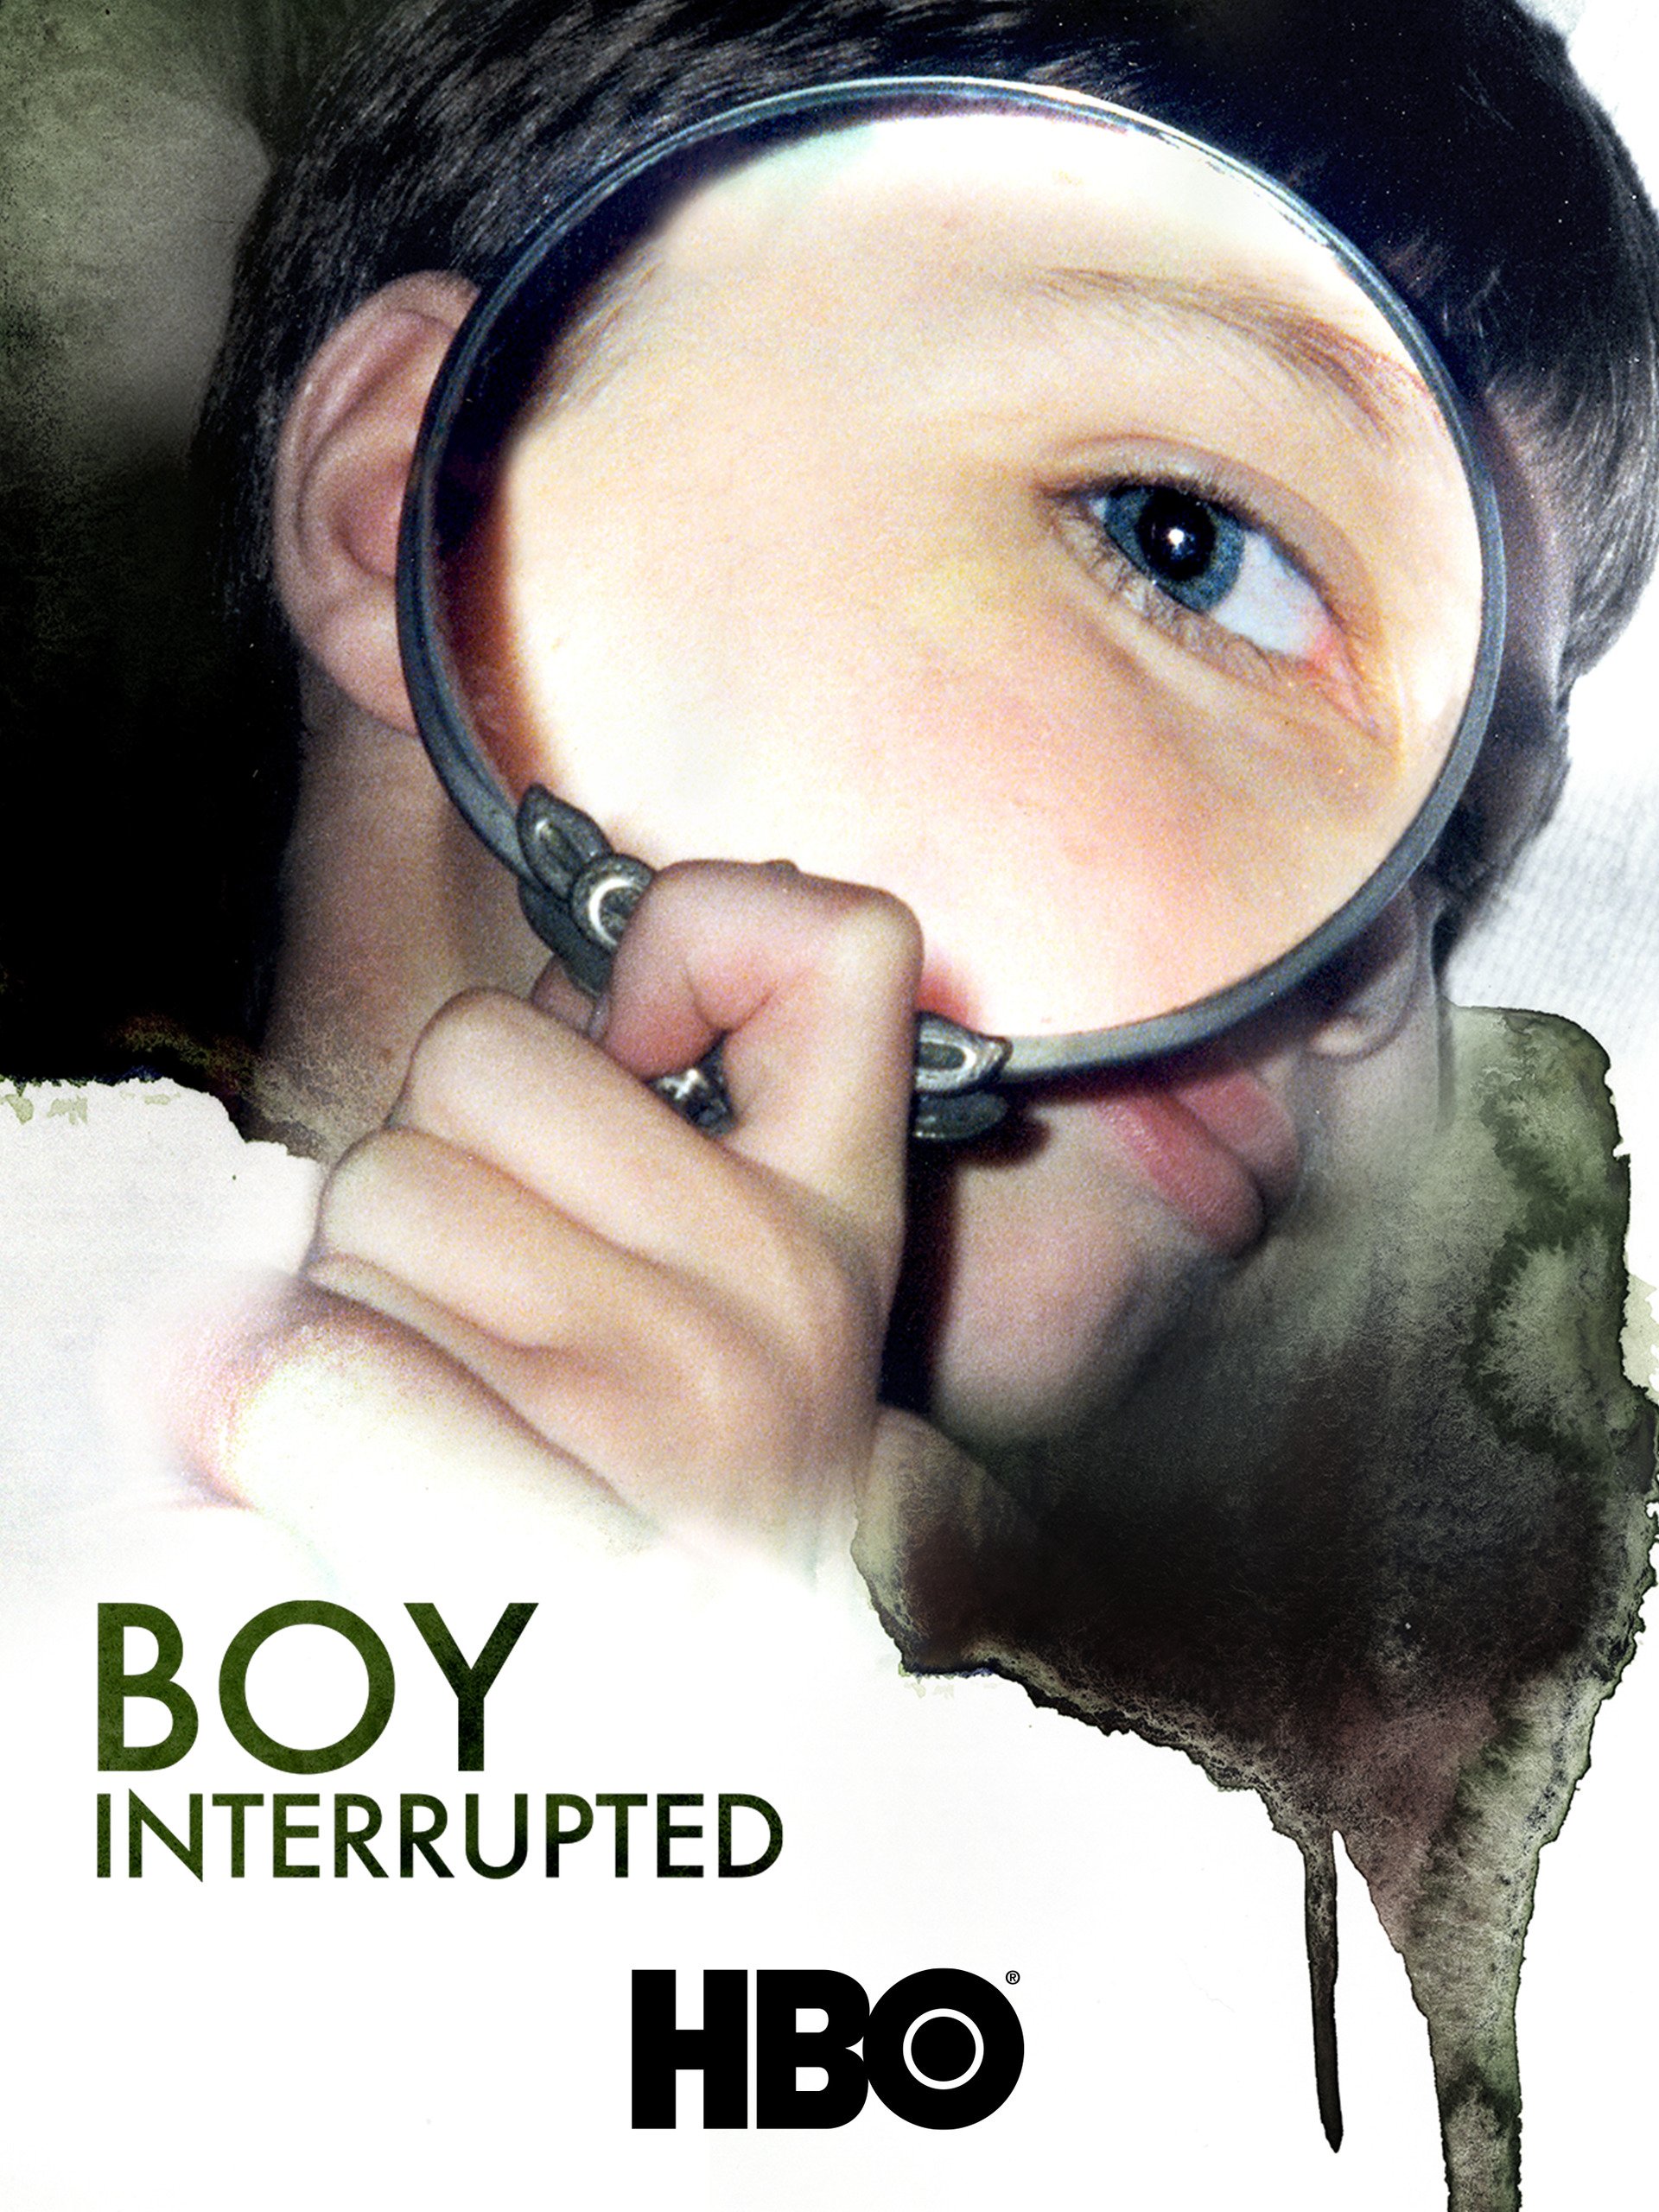 Boy Interrupted is a 2009 documentary filmed by Perry Films. The film is based on the life of Evan Perry, who experienced bipolar depression from a young.